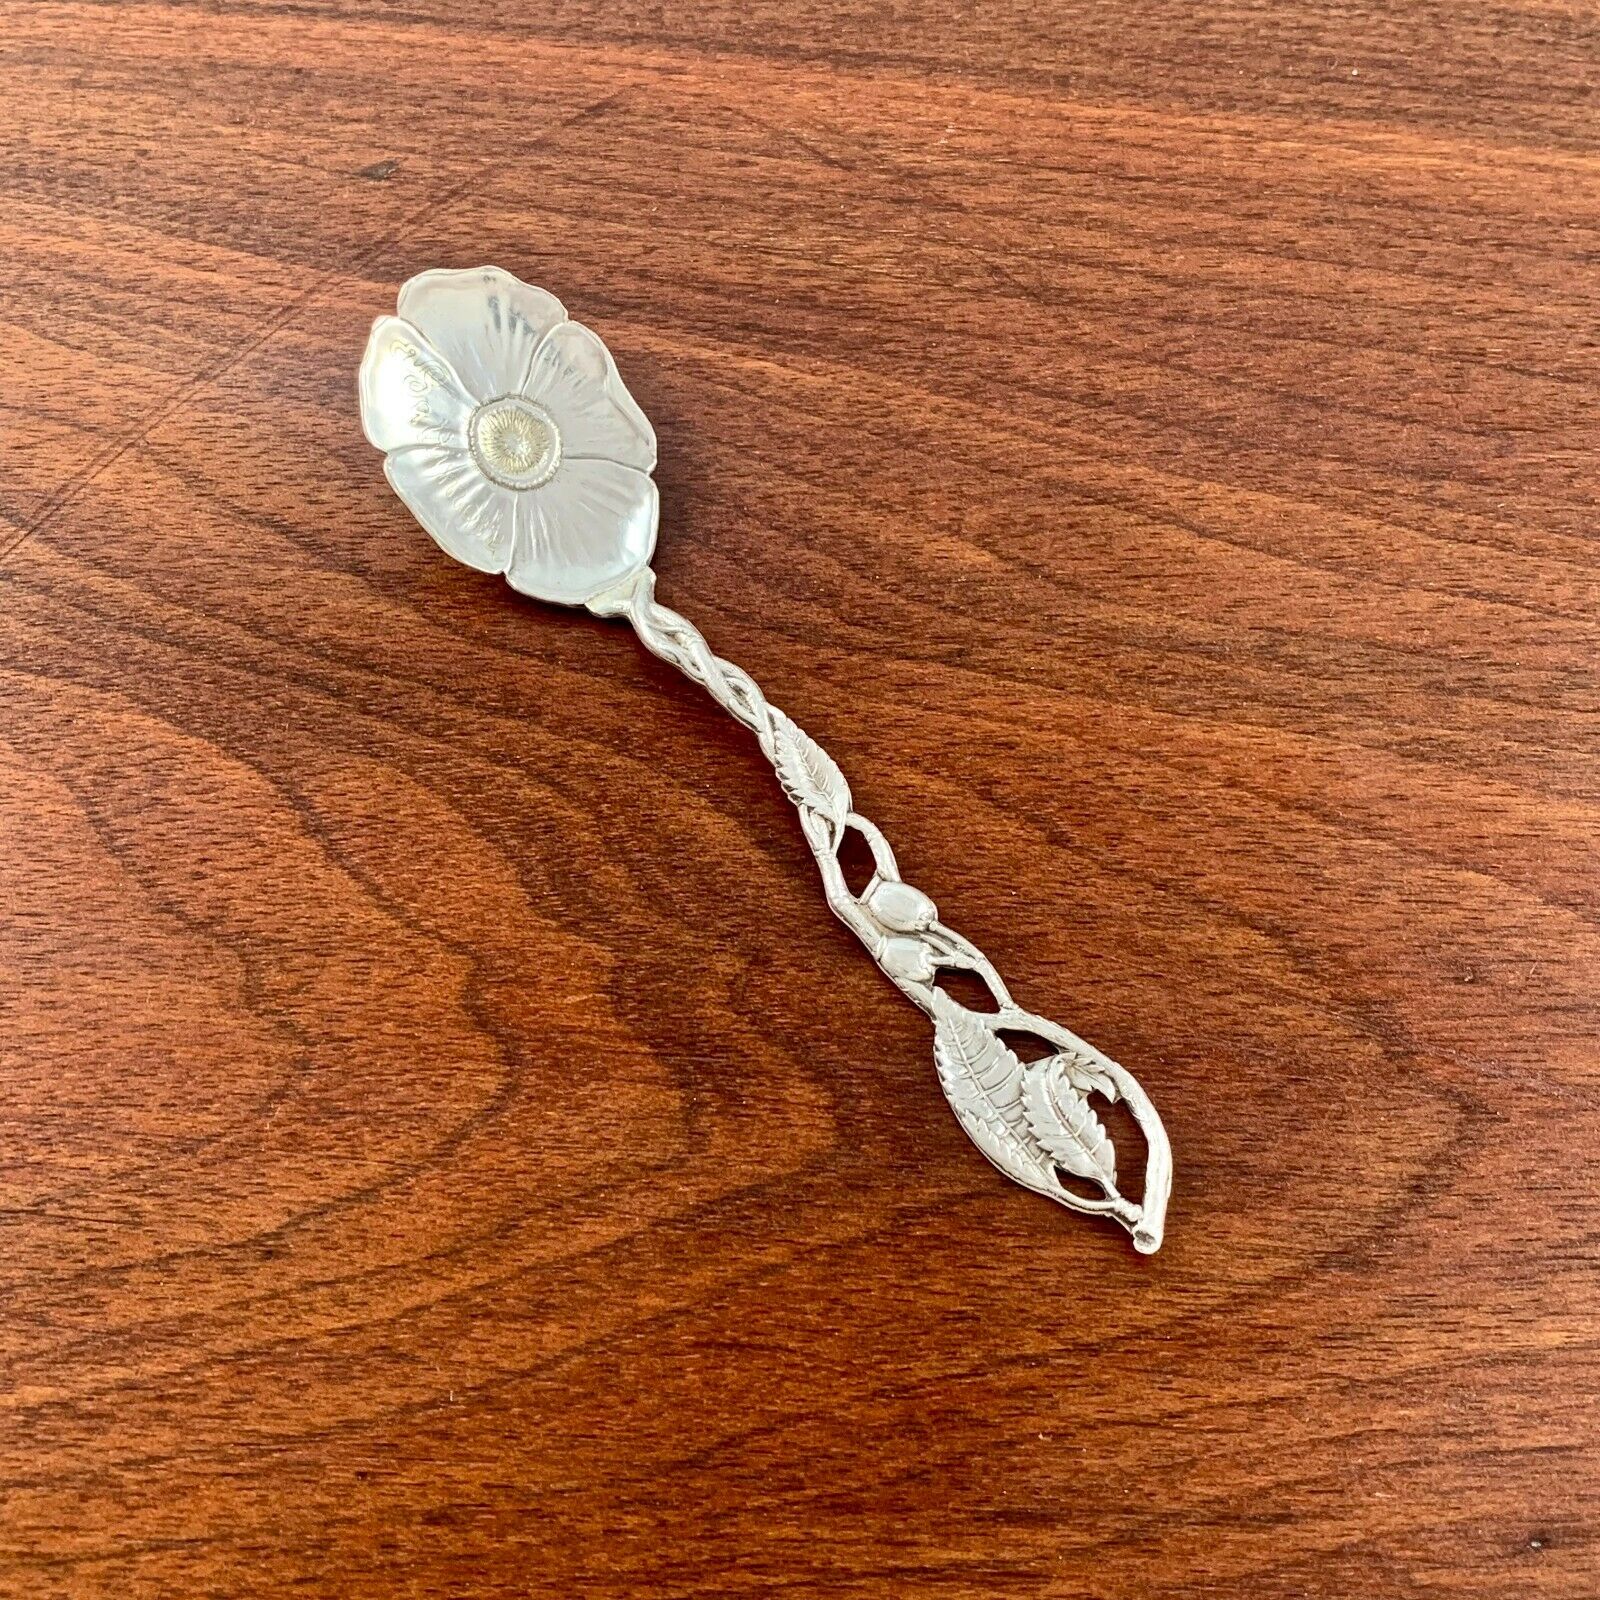 Antique Valuations: WALLACE STERLING AESTHETIC SOUVENIR SPOON BALTIMORE CHEROKEE ROSE PATTERN 1891